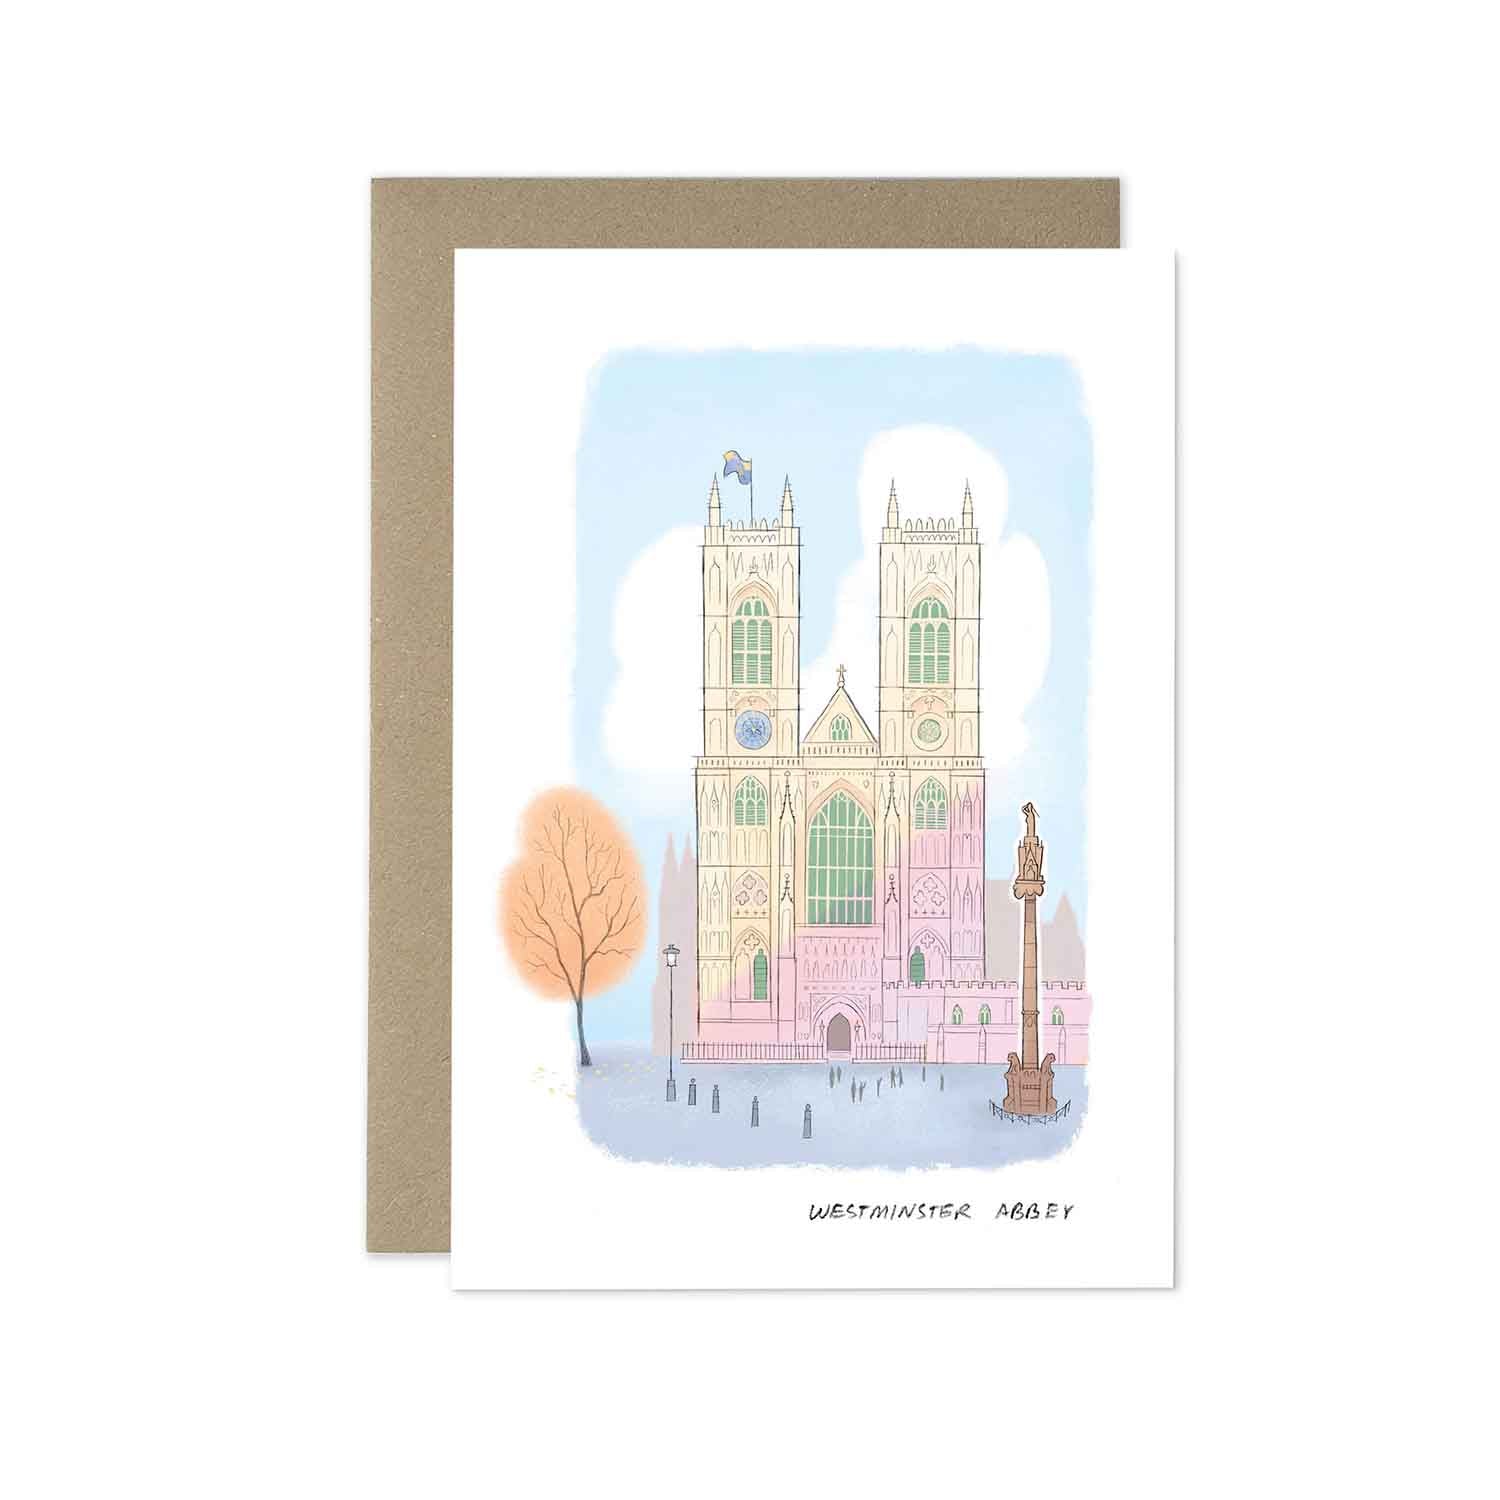 London's Westminster Abbey beautifully illustrated on a greeting card from mike green illustration.